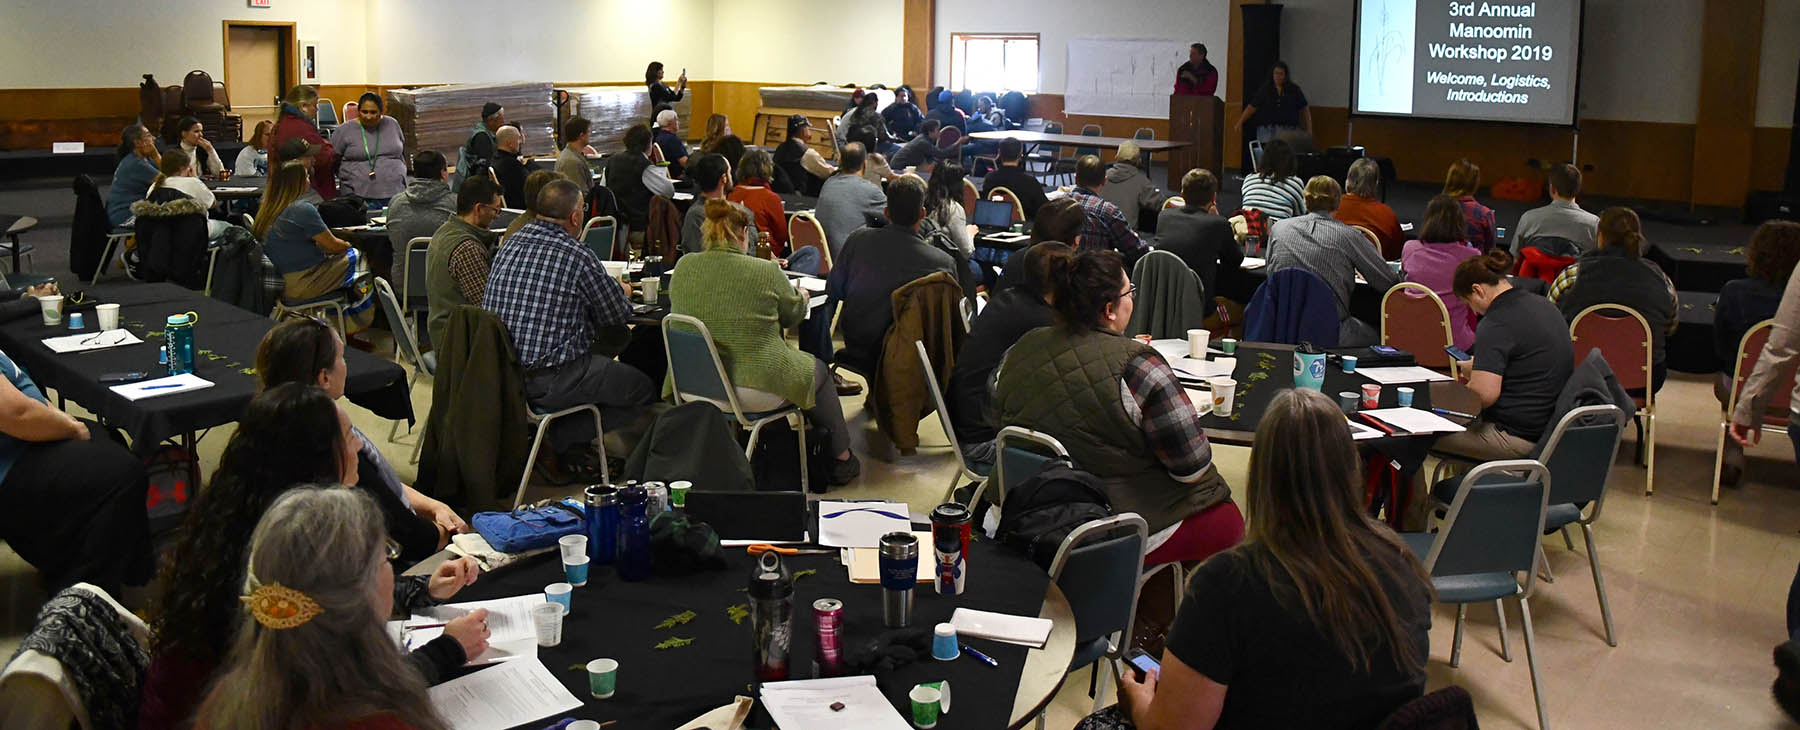 Photo of attendees at the 3rd Annual Michigan Wild Rice Initiative Meeting